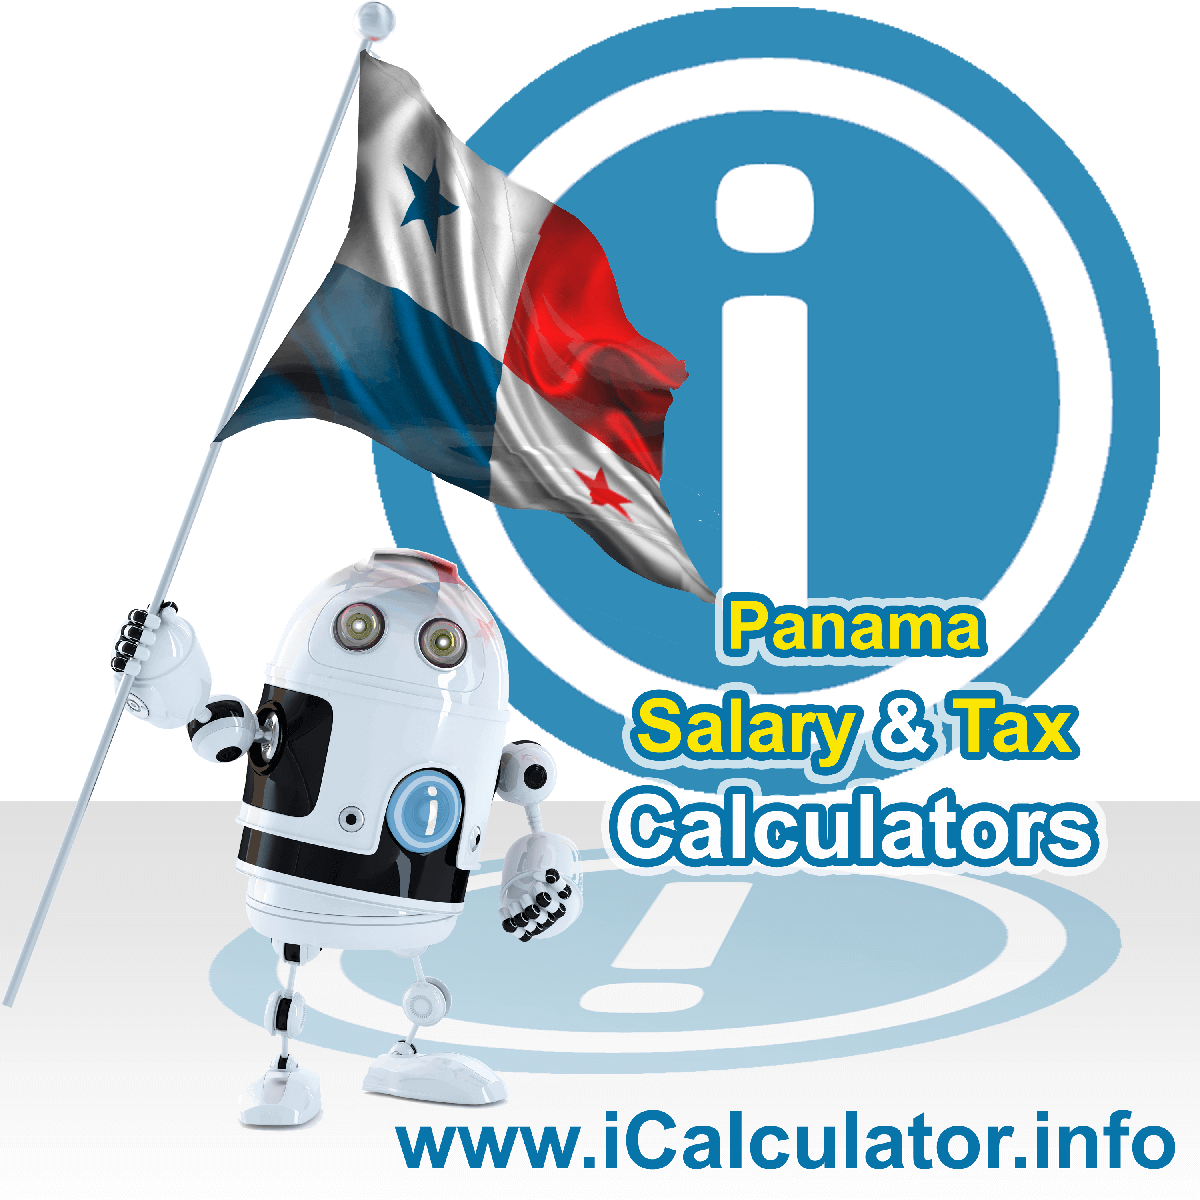 Panama Salary Calculator. This image shows the Panamaese flag and information relating to the tax formula for the Panama Tax Calculator